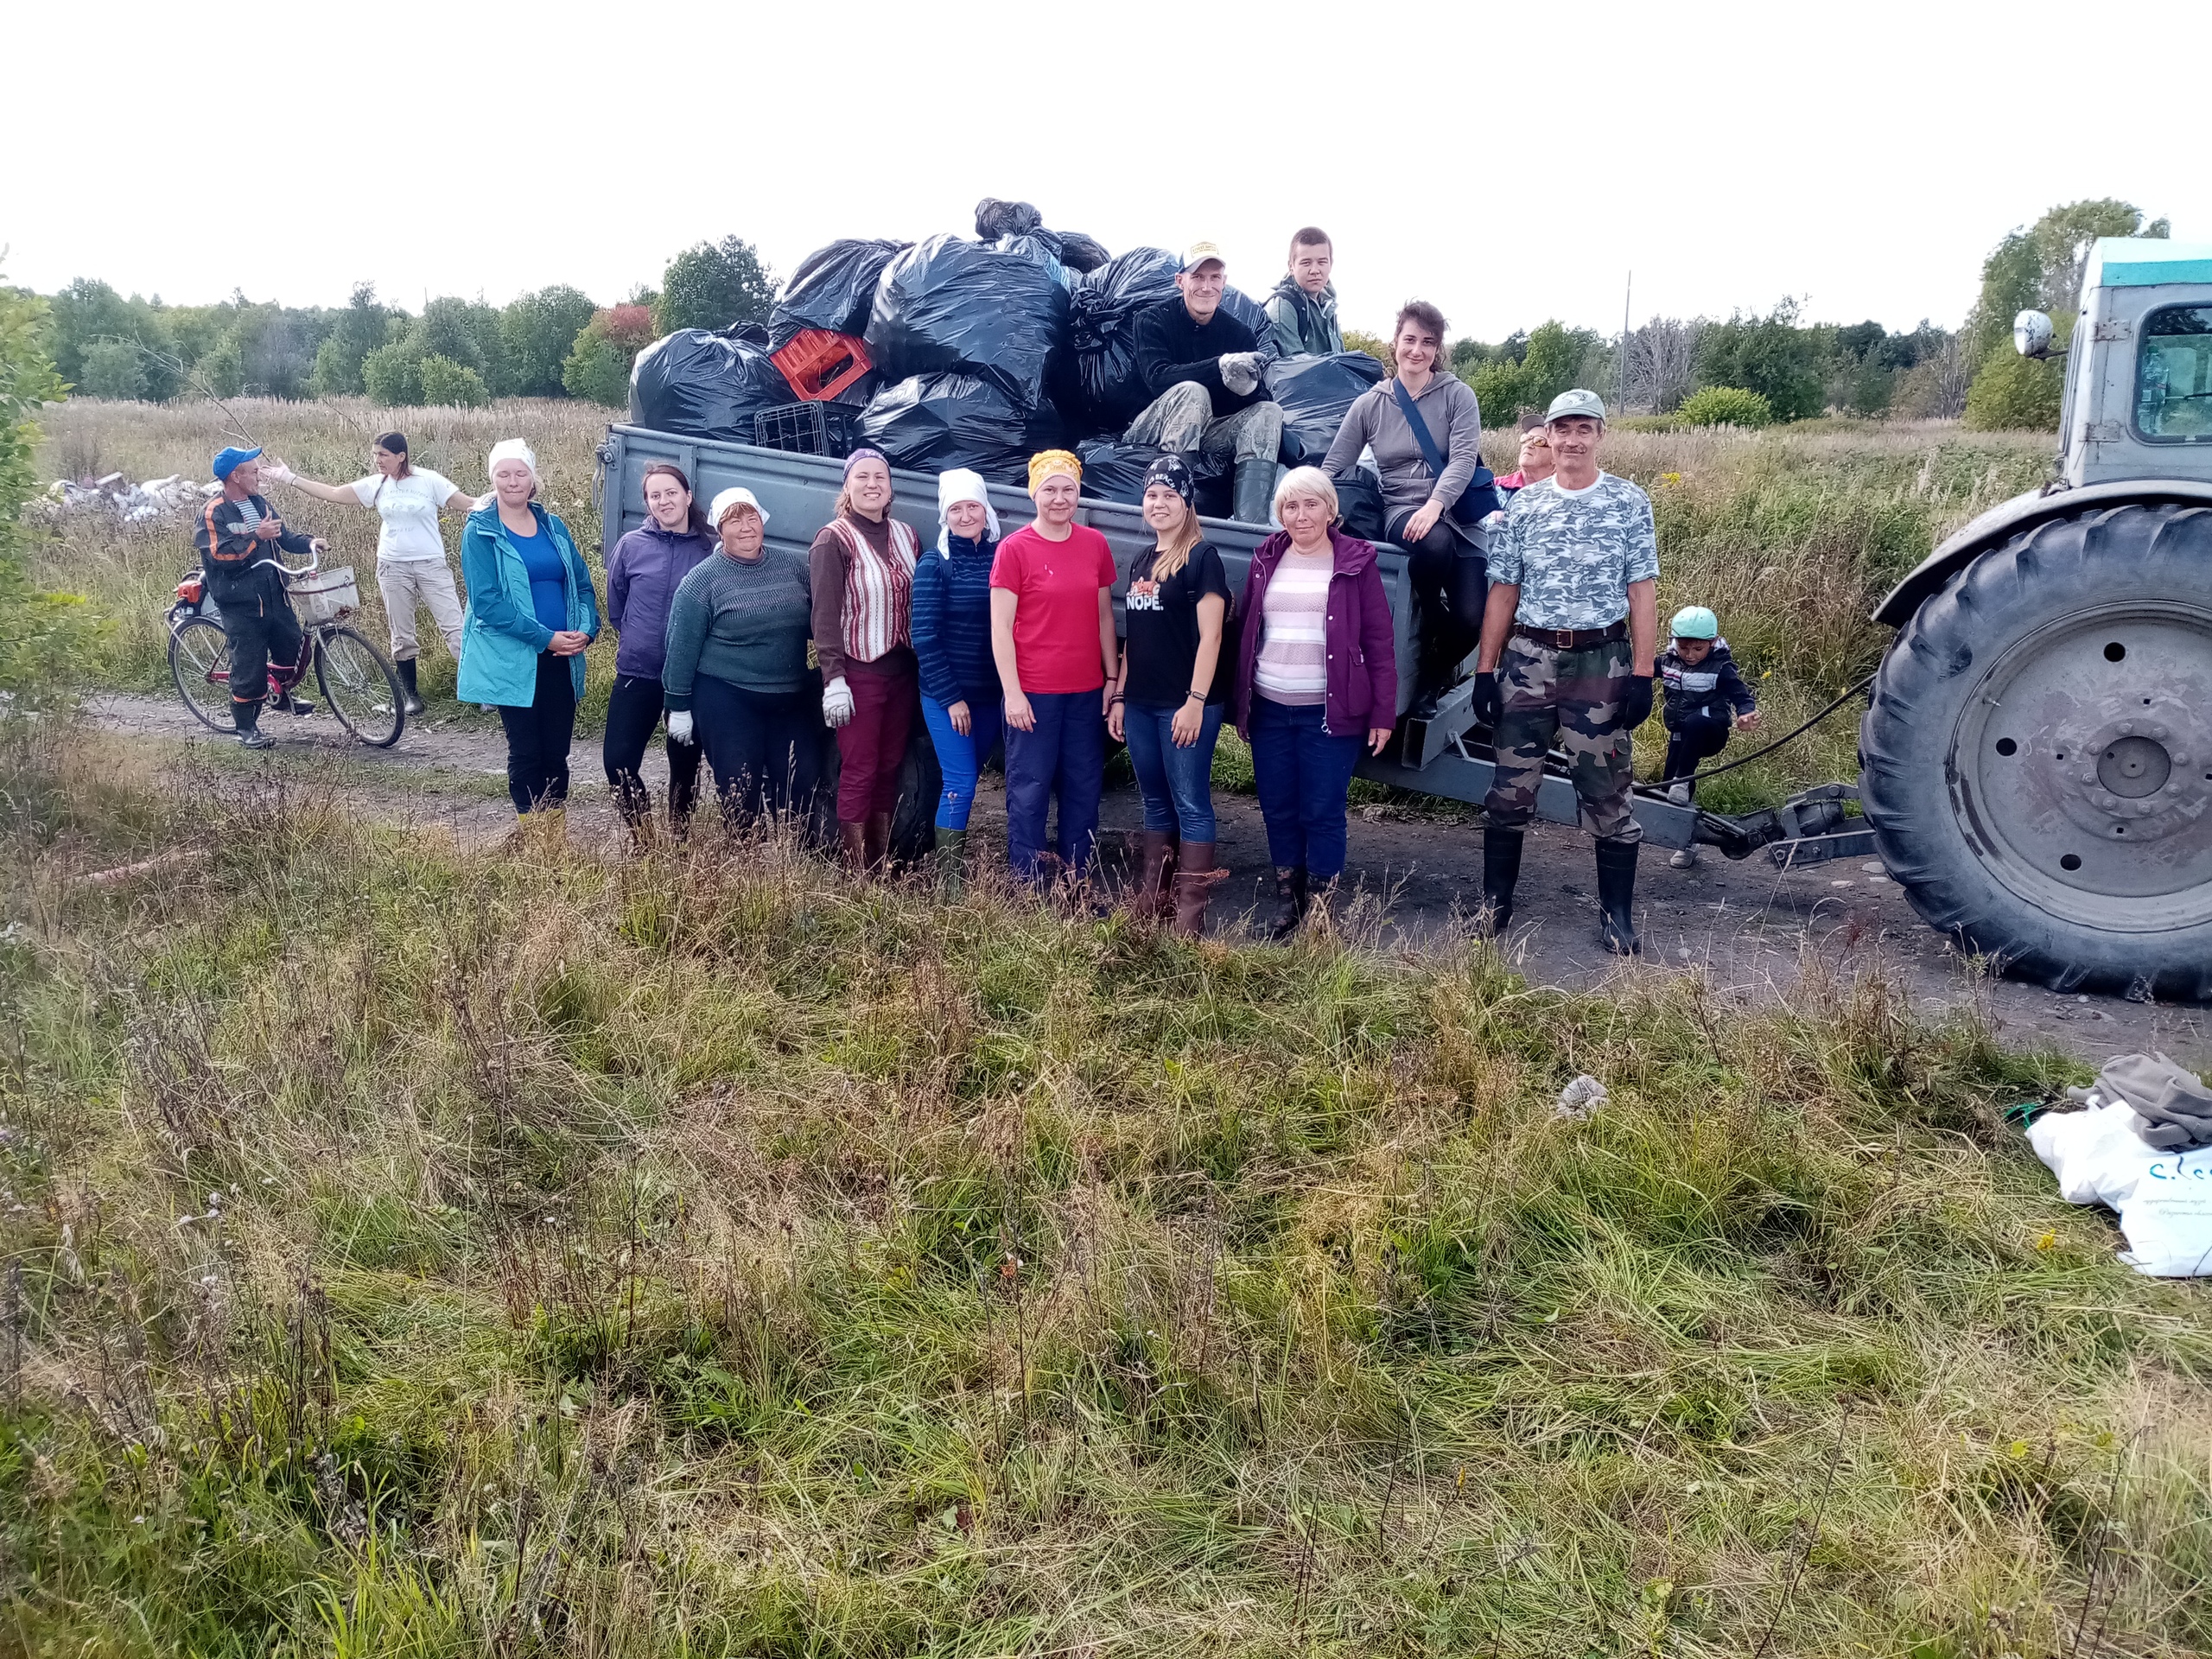 6th volunteer expedition to the Kizhi Island